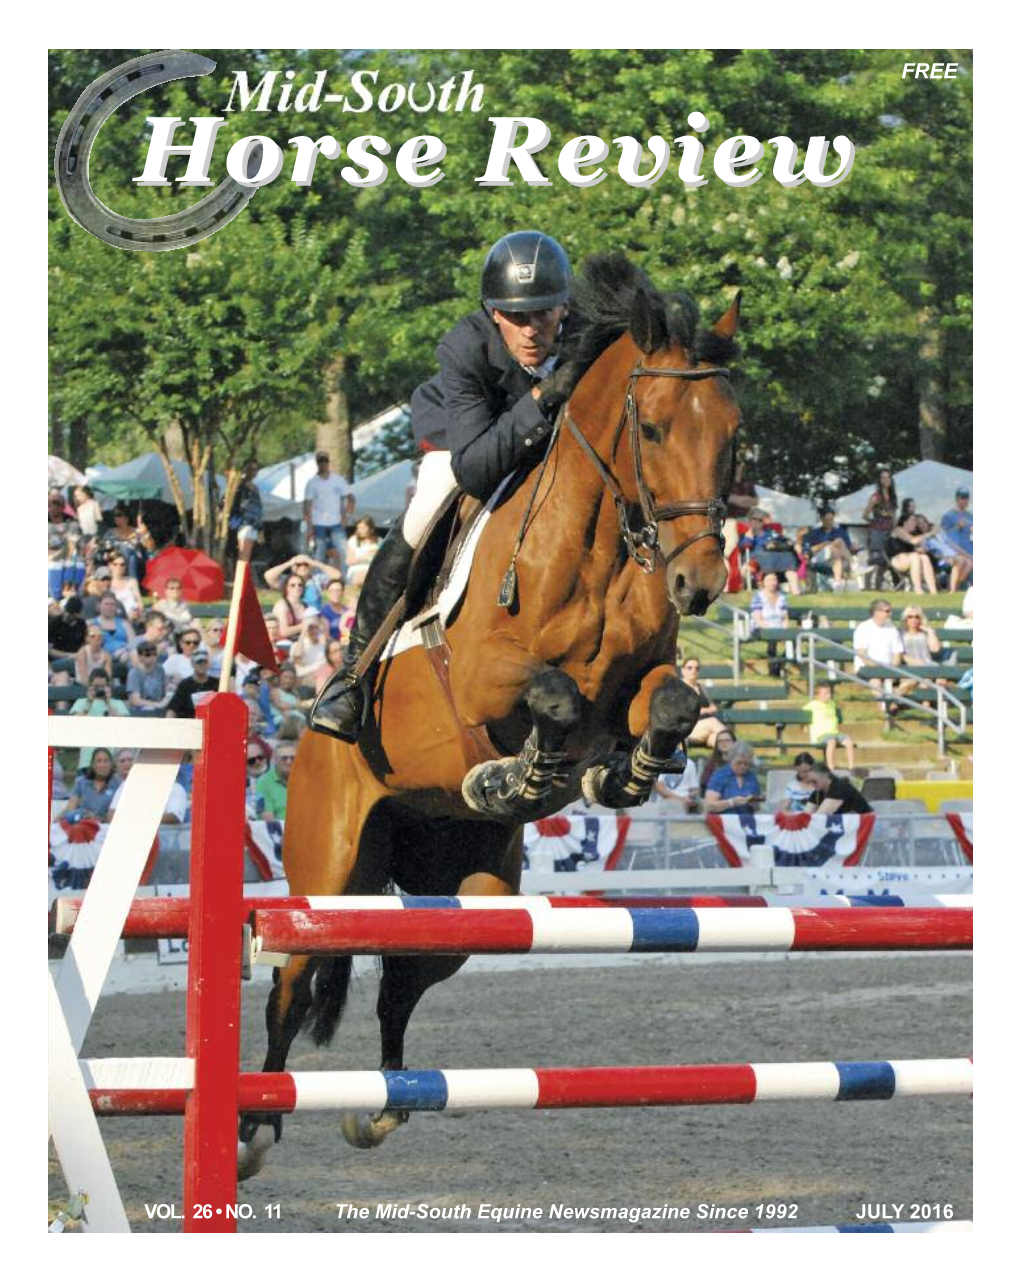 VOL. 26 • NO. 11 the Mid-South Equine Newsmagazine Since 1992 JULY 2016 2